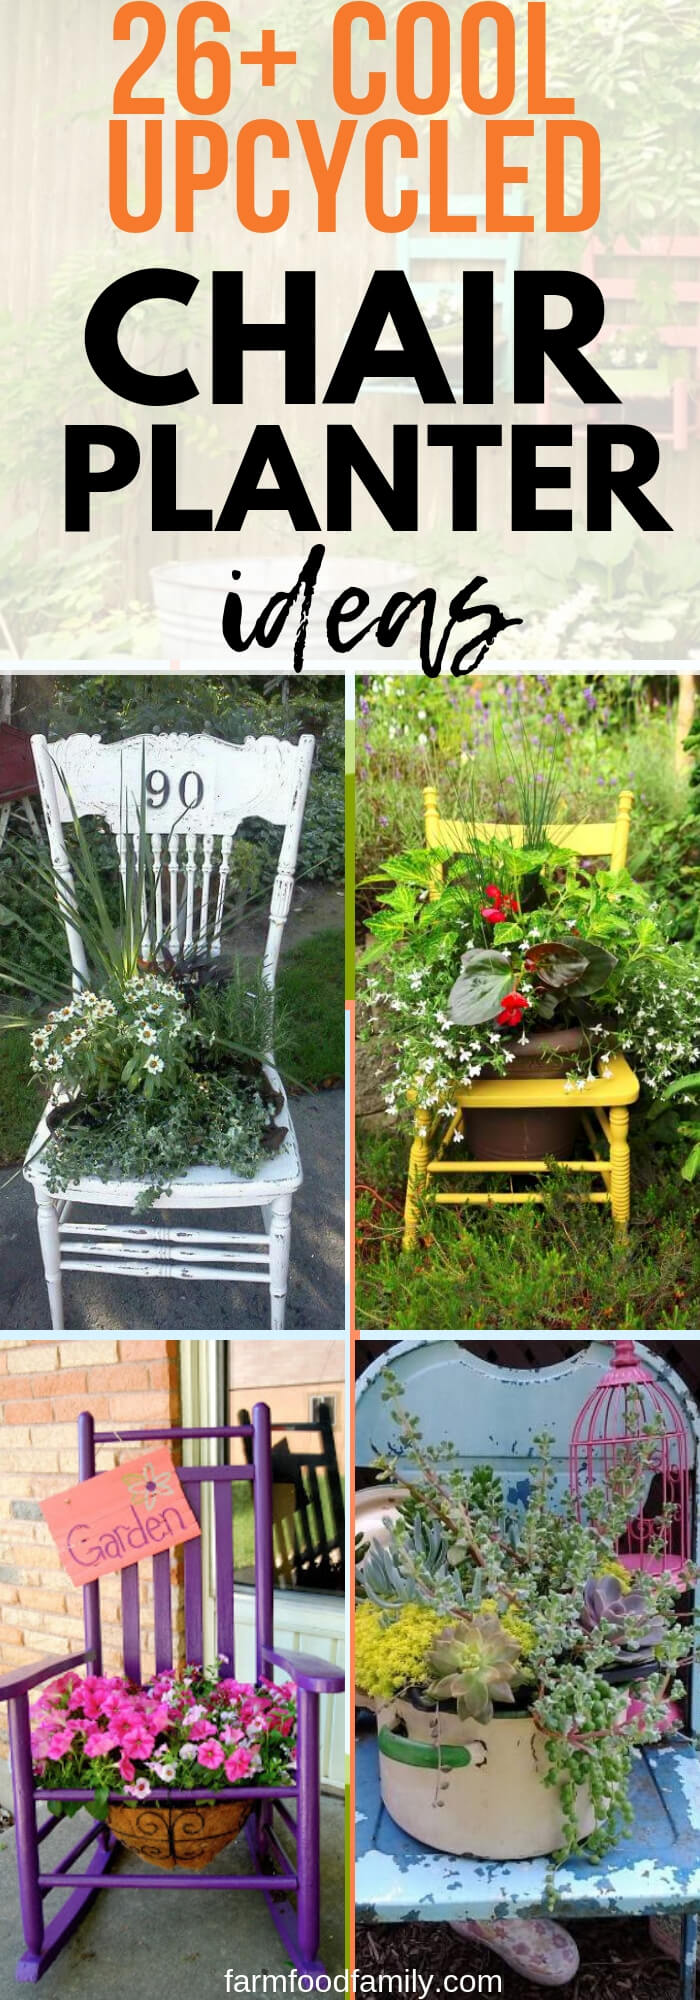 Best Upcycled DIY Chair Planter Ideas For Your Garden